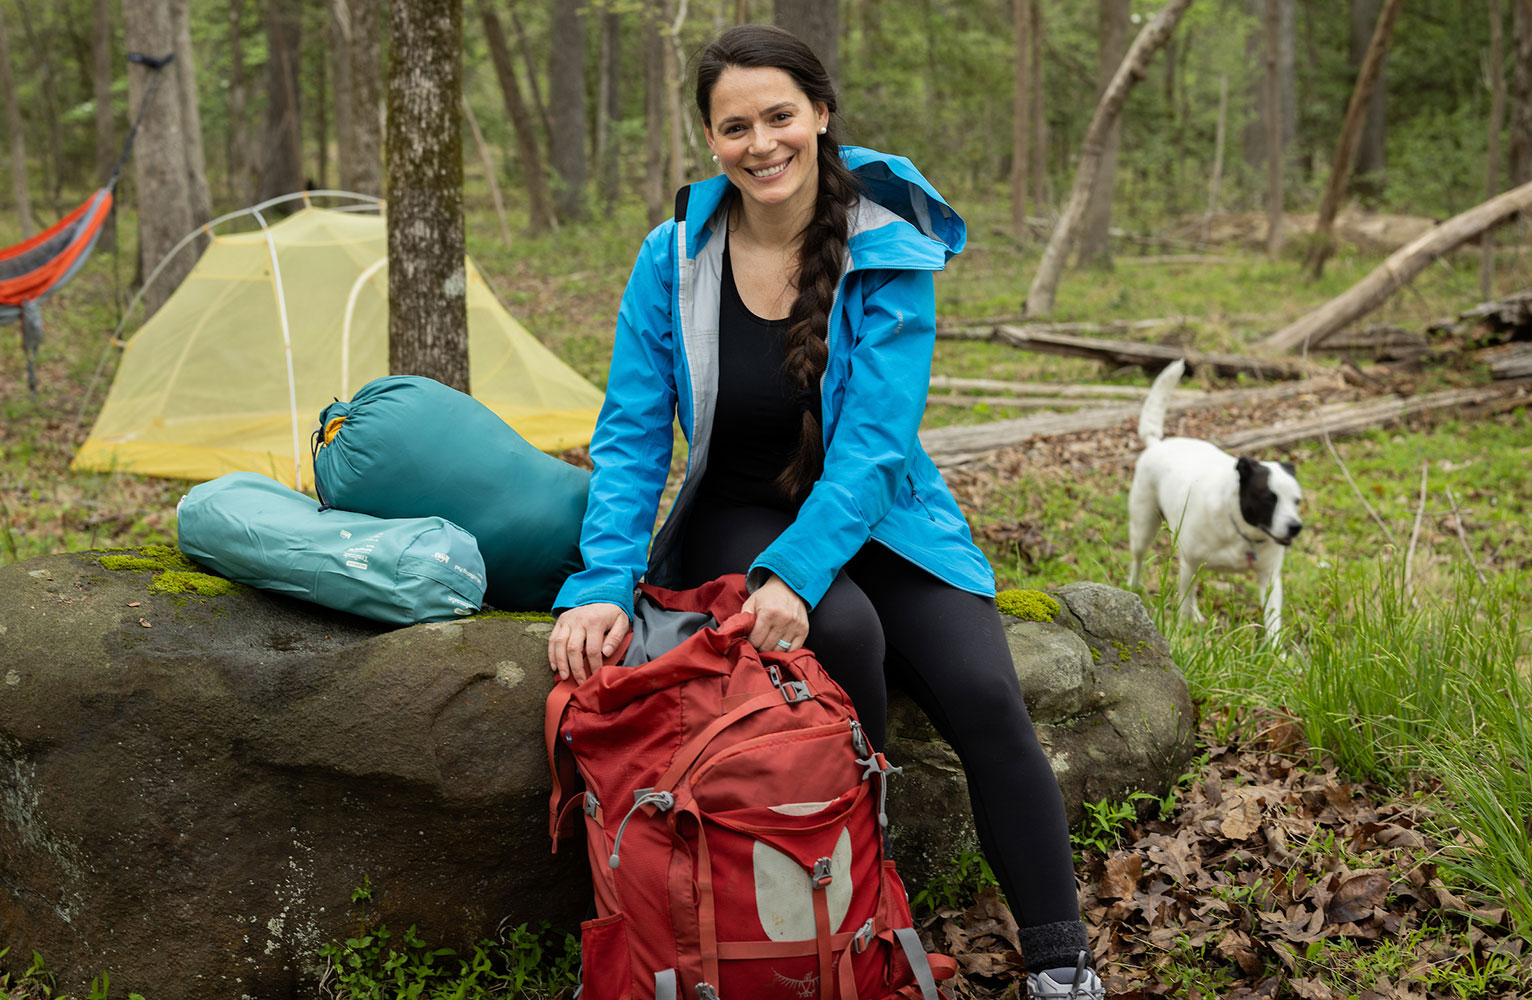 Rada Petric sits on a rock at a campsite with her hands resting on a hiking backpack. A beautiful white dog is in the background.